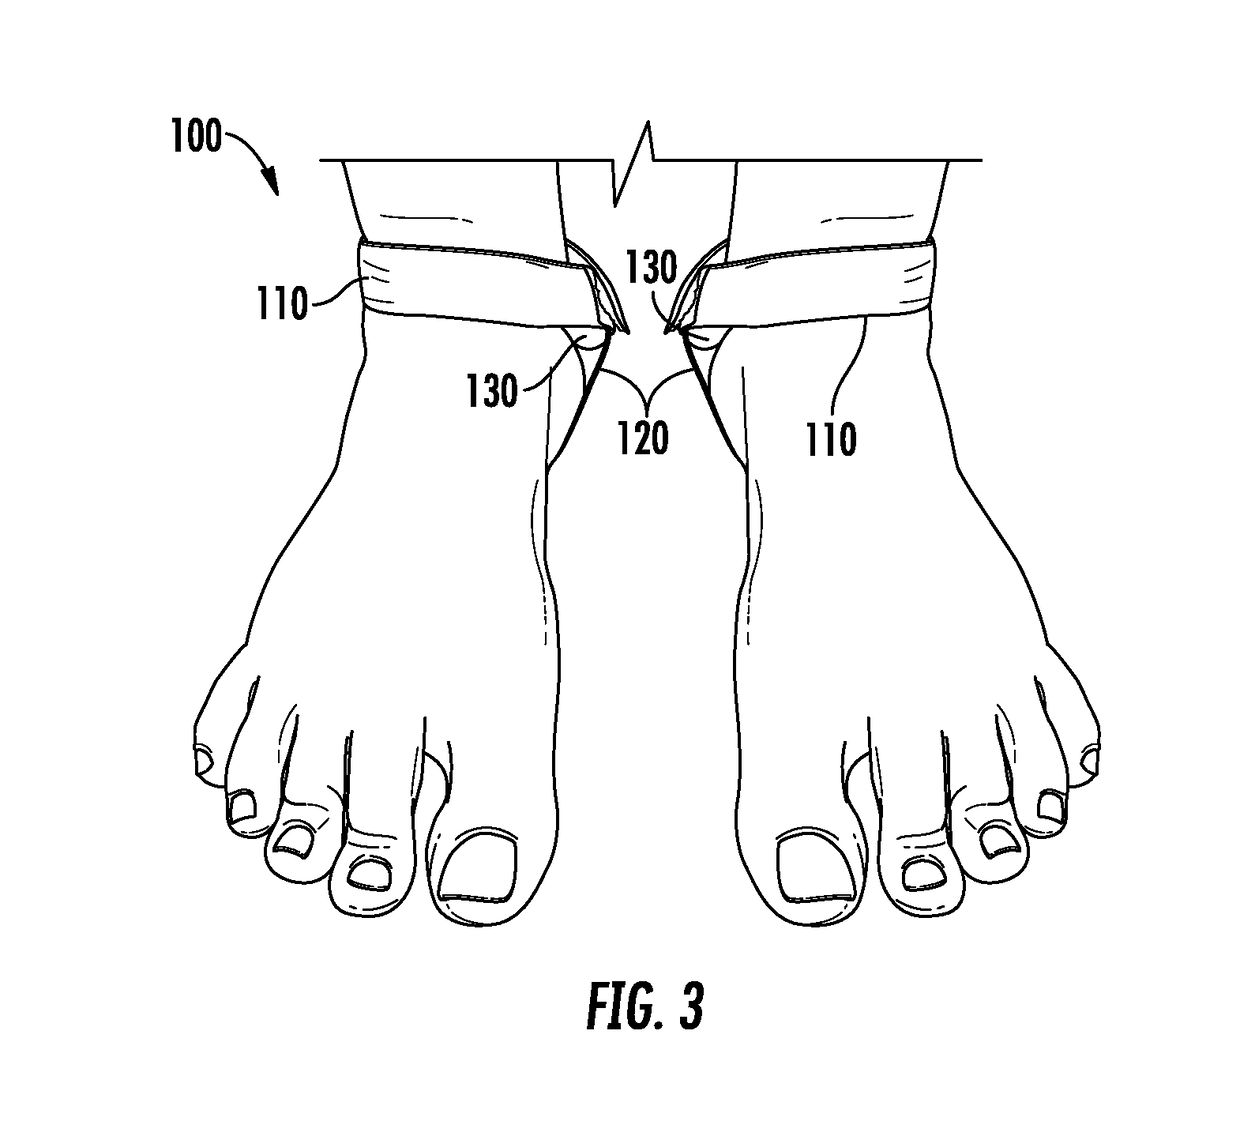 Acupressure therapeutic foot band for and method of menstrual pain relief